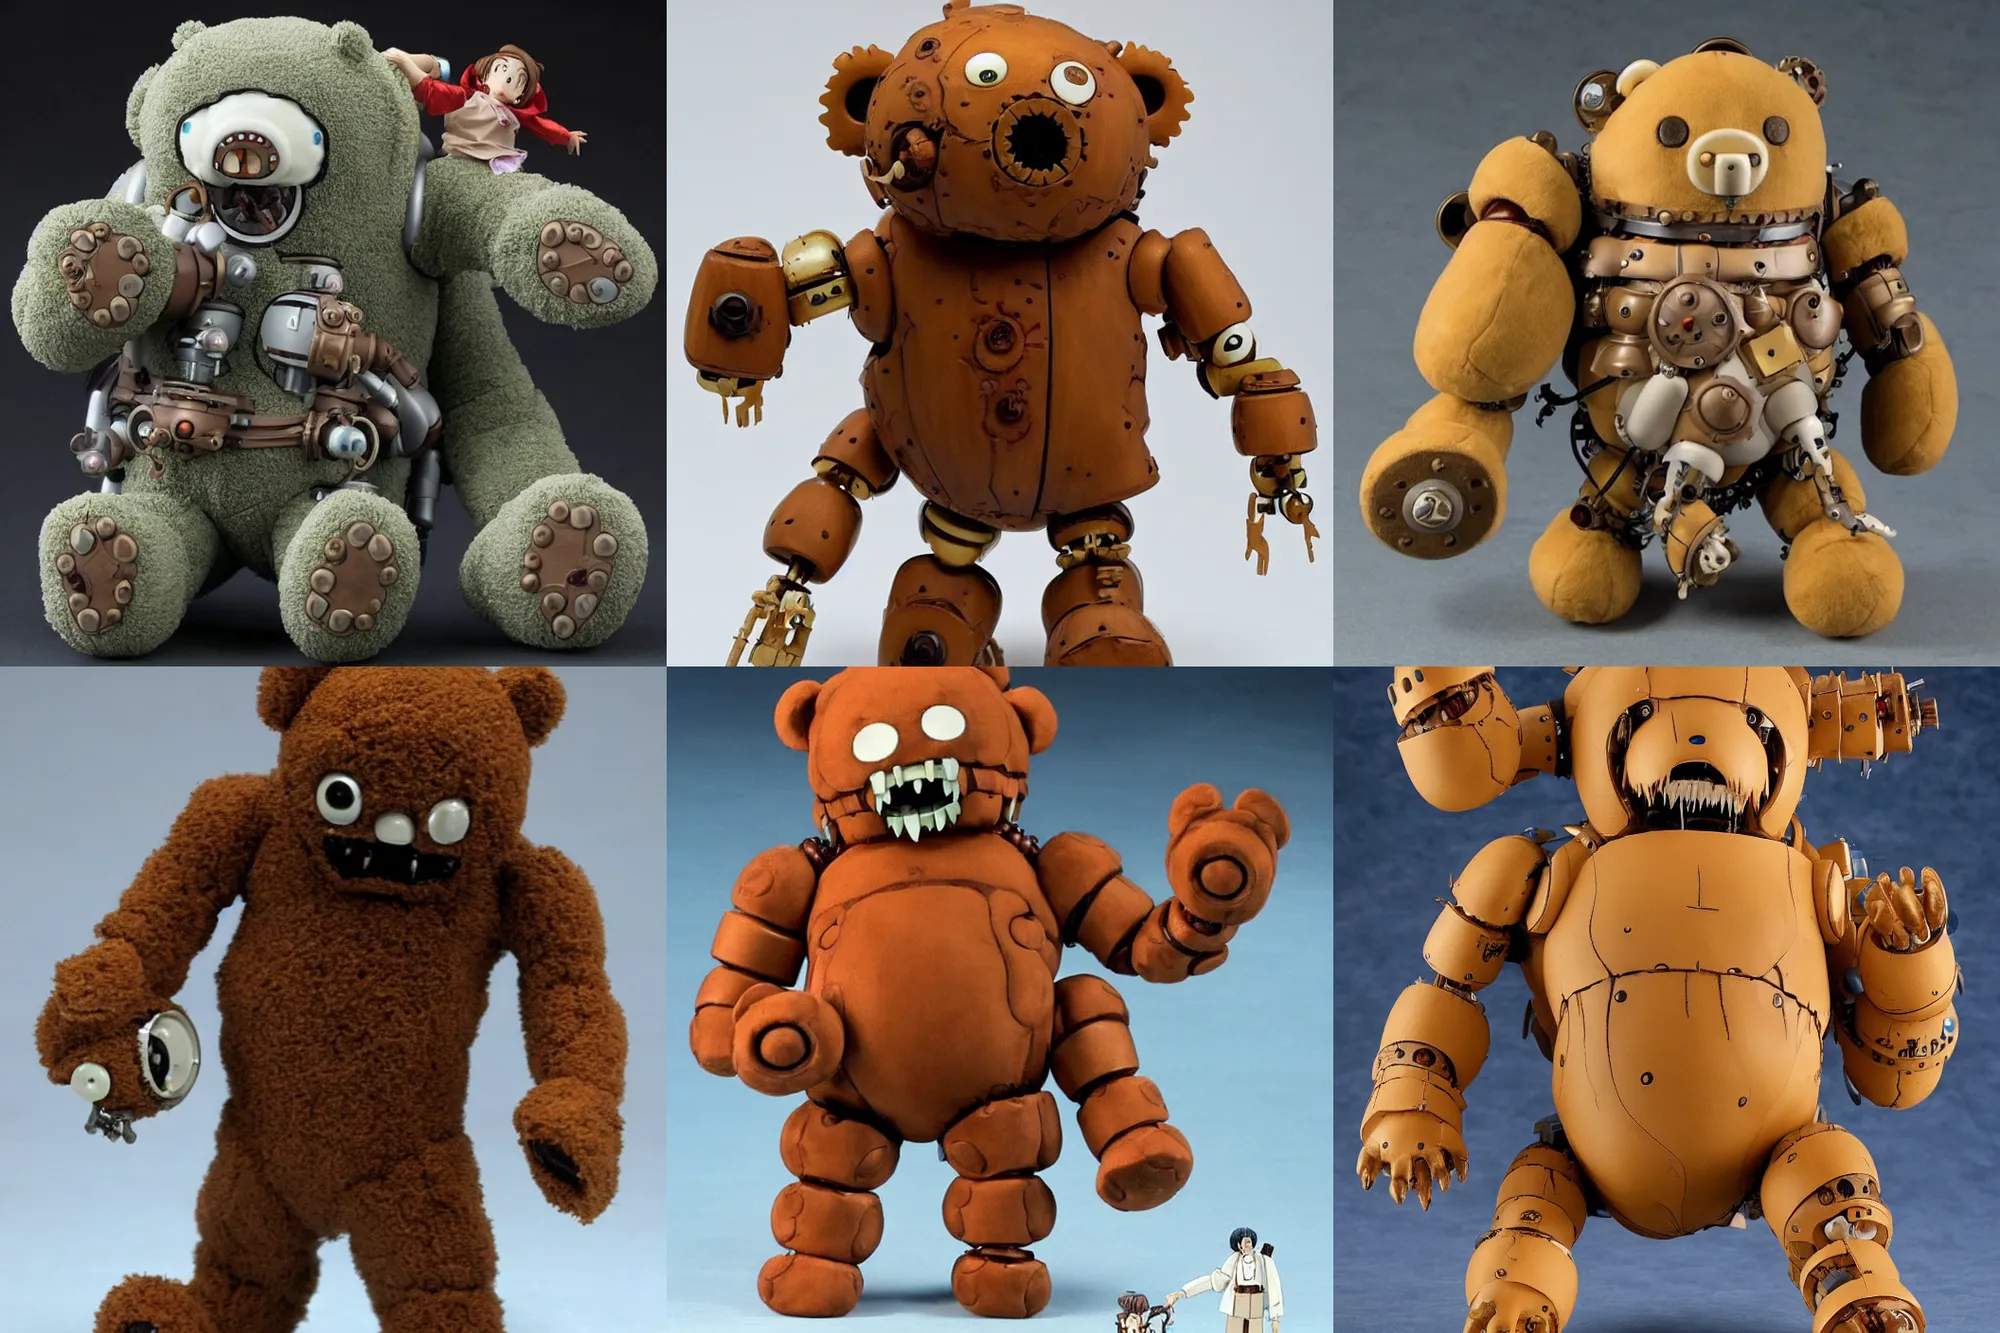 Prompt: A Lovecraftian scary giant mechanized adorable teddy bear from Studio Ghibli Howl's Moving Castle (2004) as a 1980's Kenner style action figure, 5 points of articulation, full body, 4k, highly detailed. award winning sci-fi. look at all that detail!